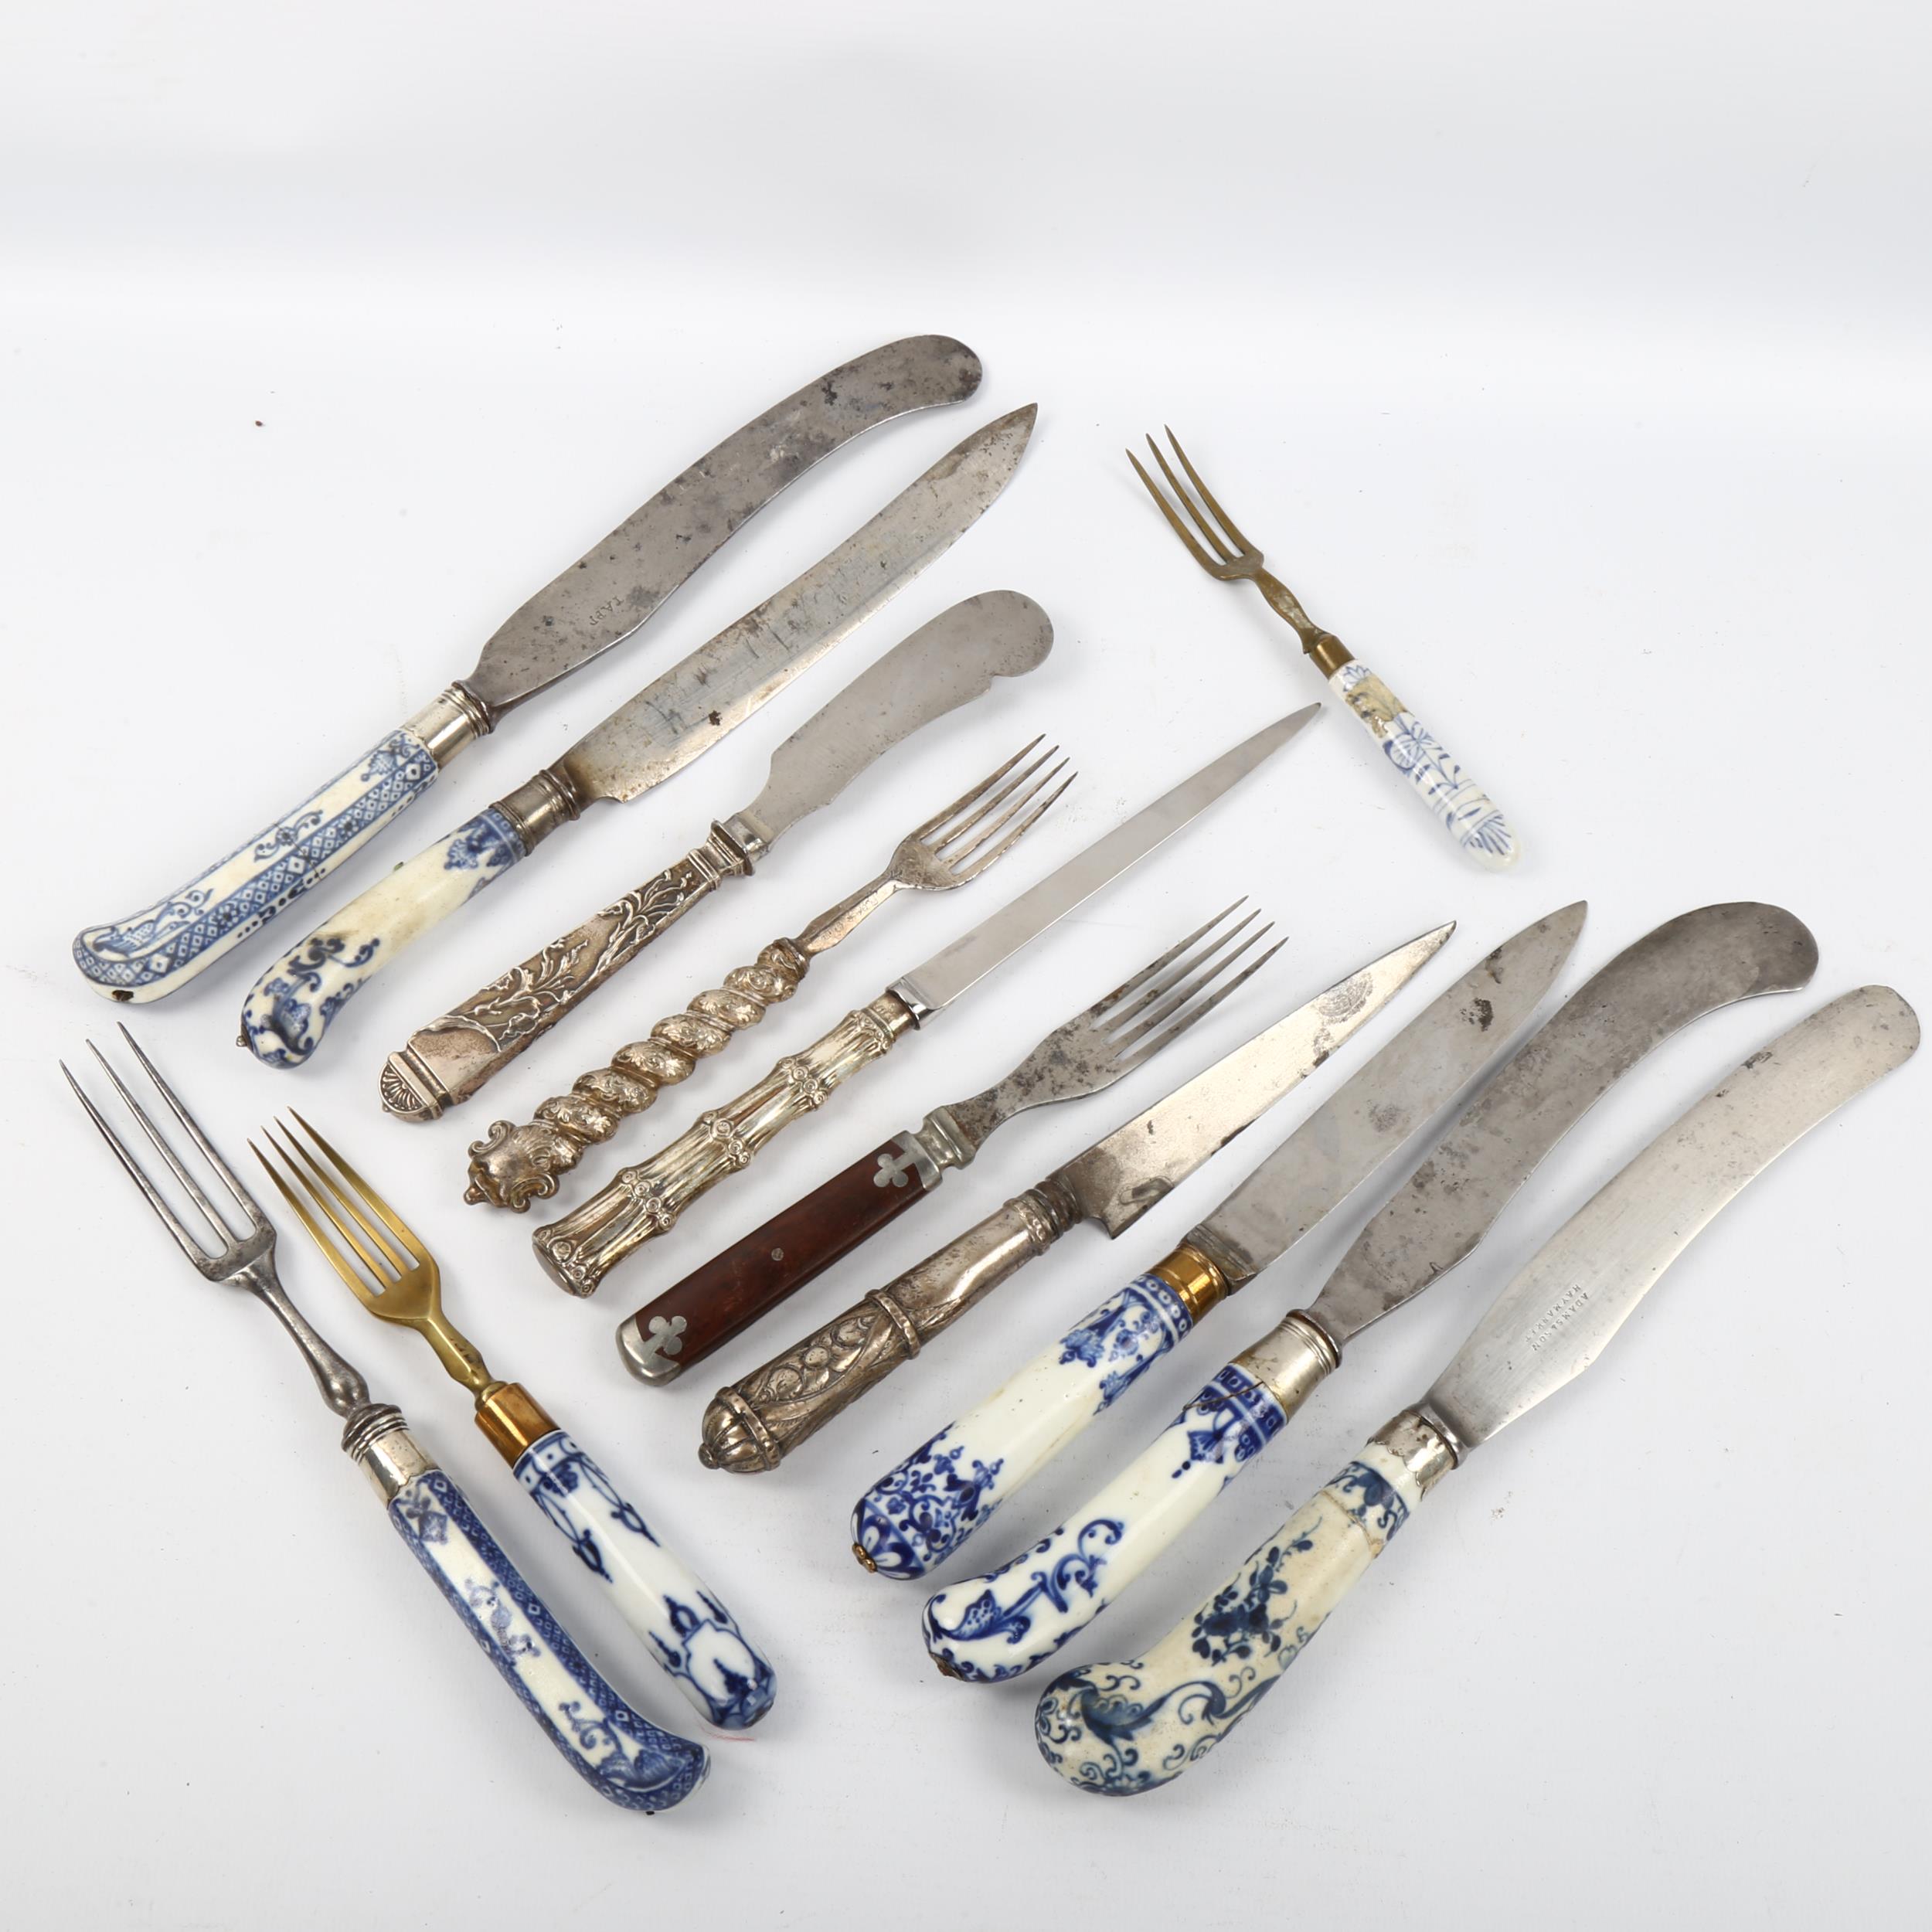 A group of 18th century Meissen blue and white porcelain-handled knives and forks, a silver-